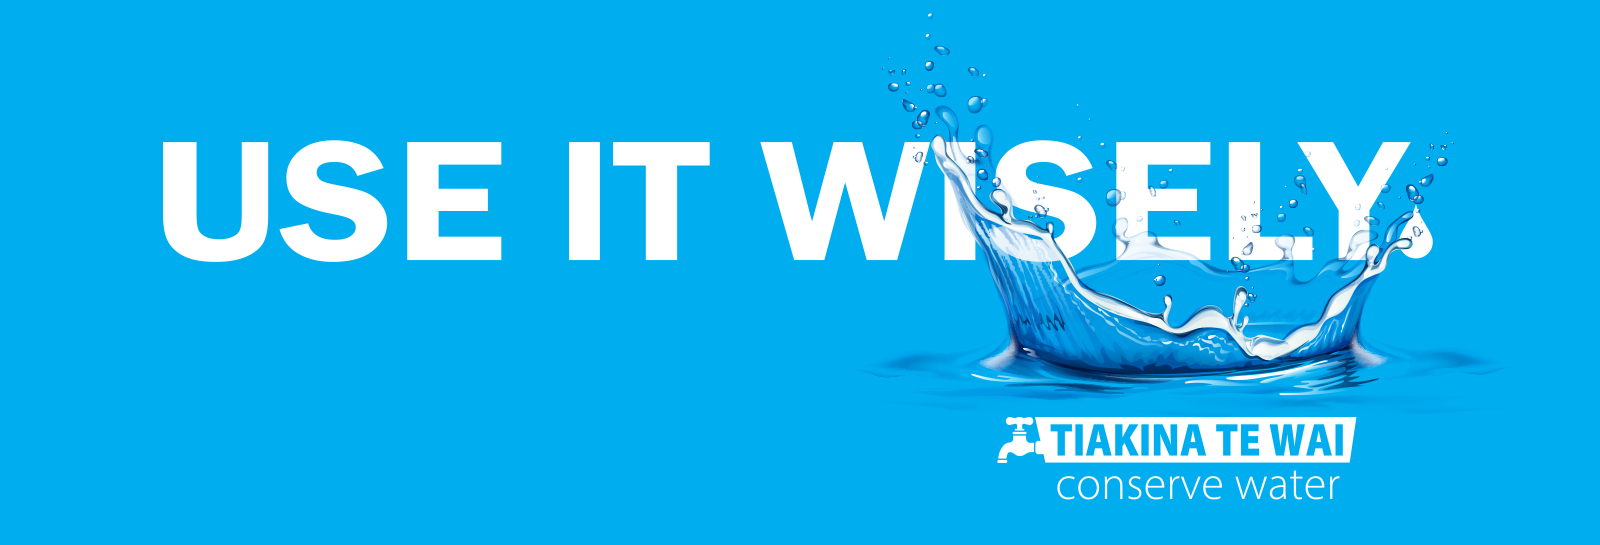 Wise with water banner image